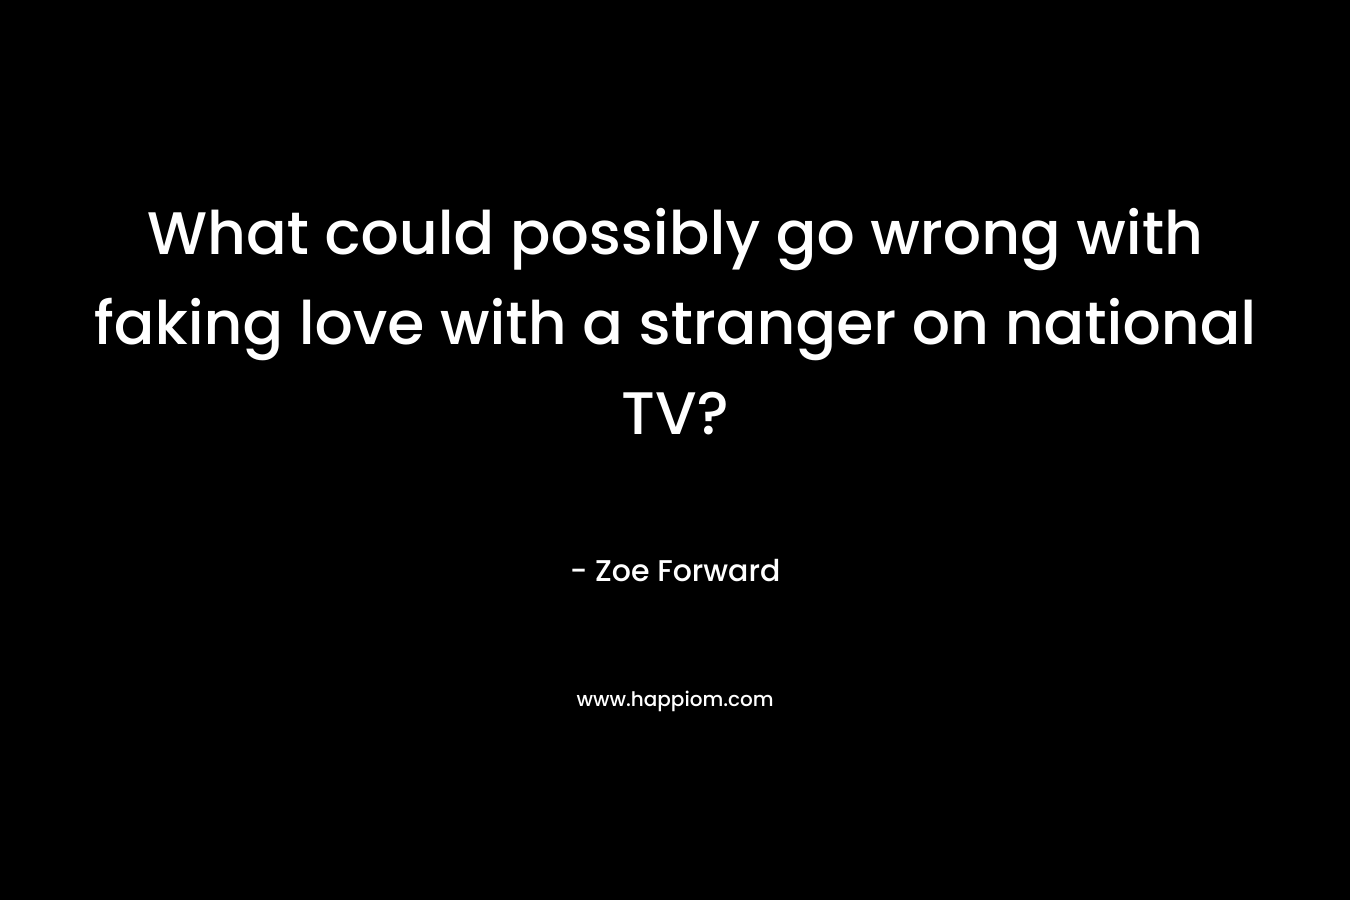 What could possibly go wrong with faking love with a stranger on national TV? – Zoe Forward